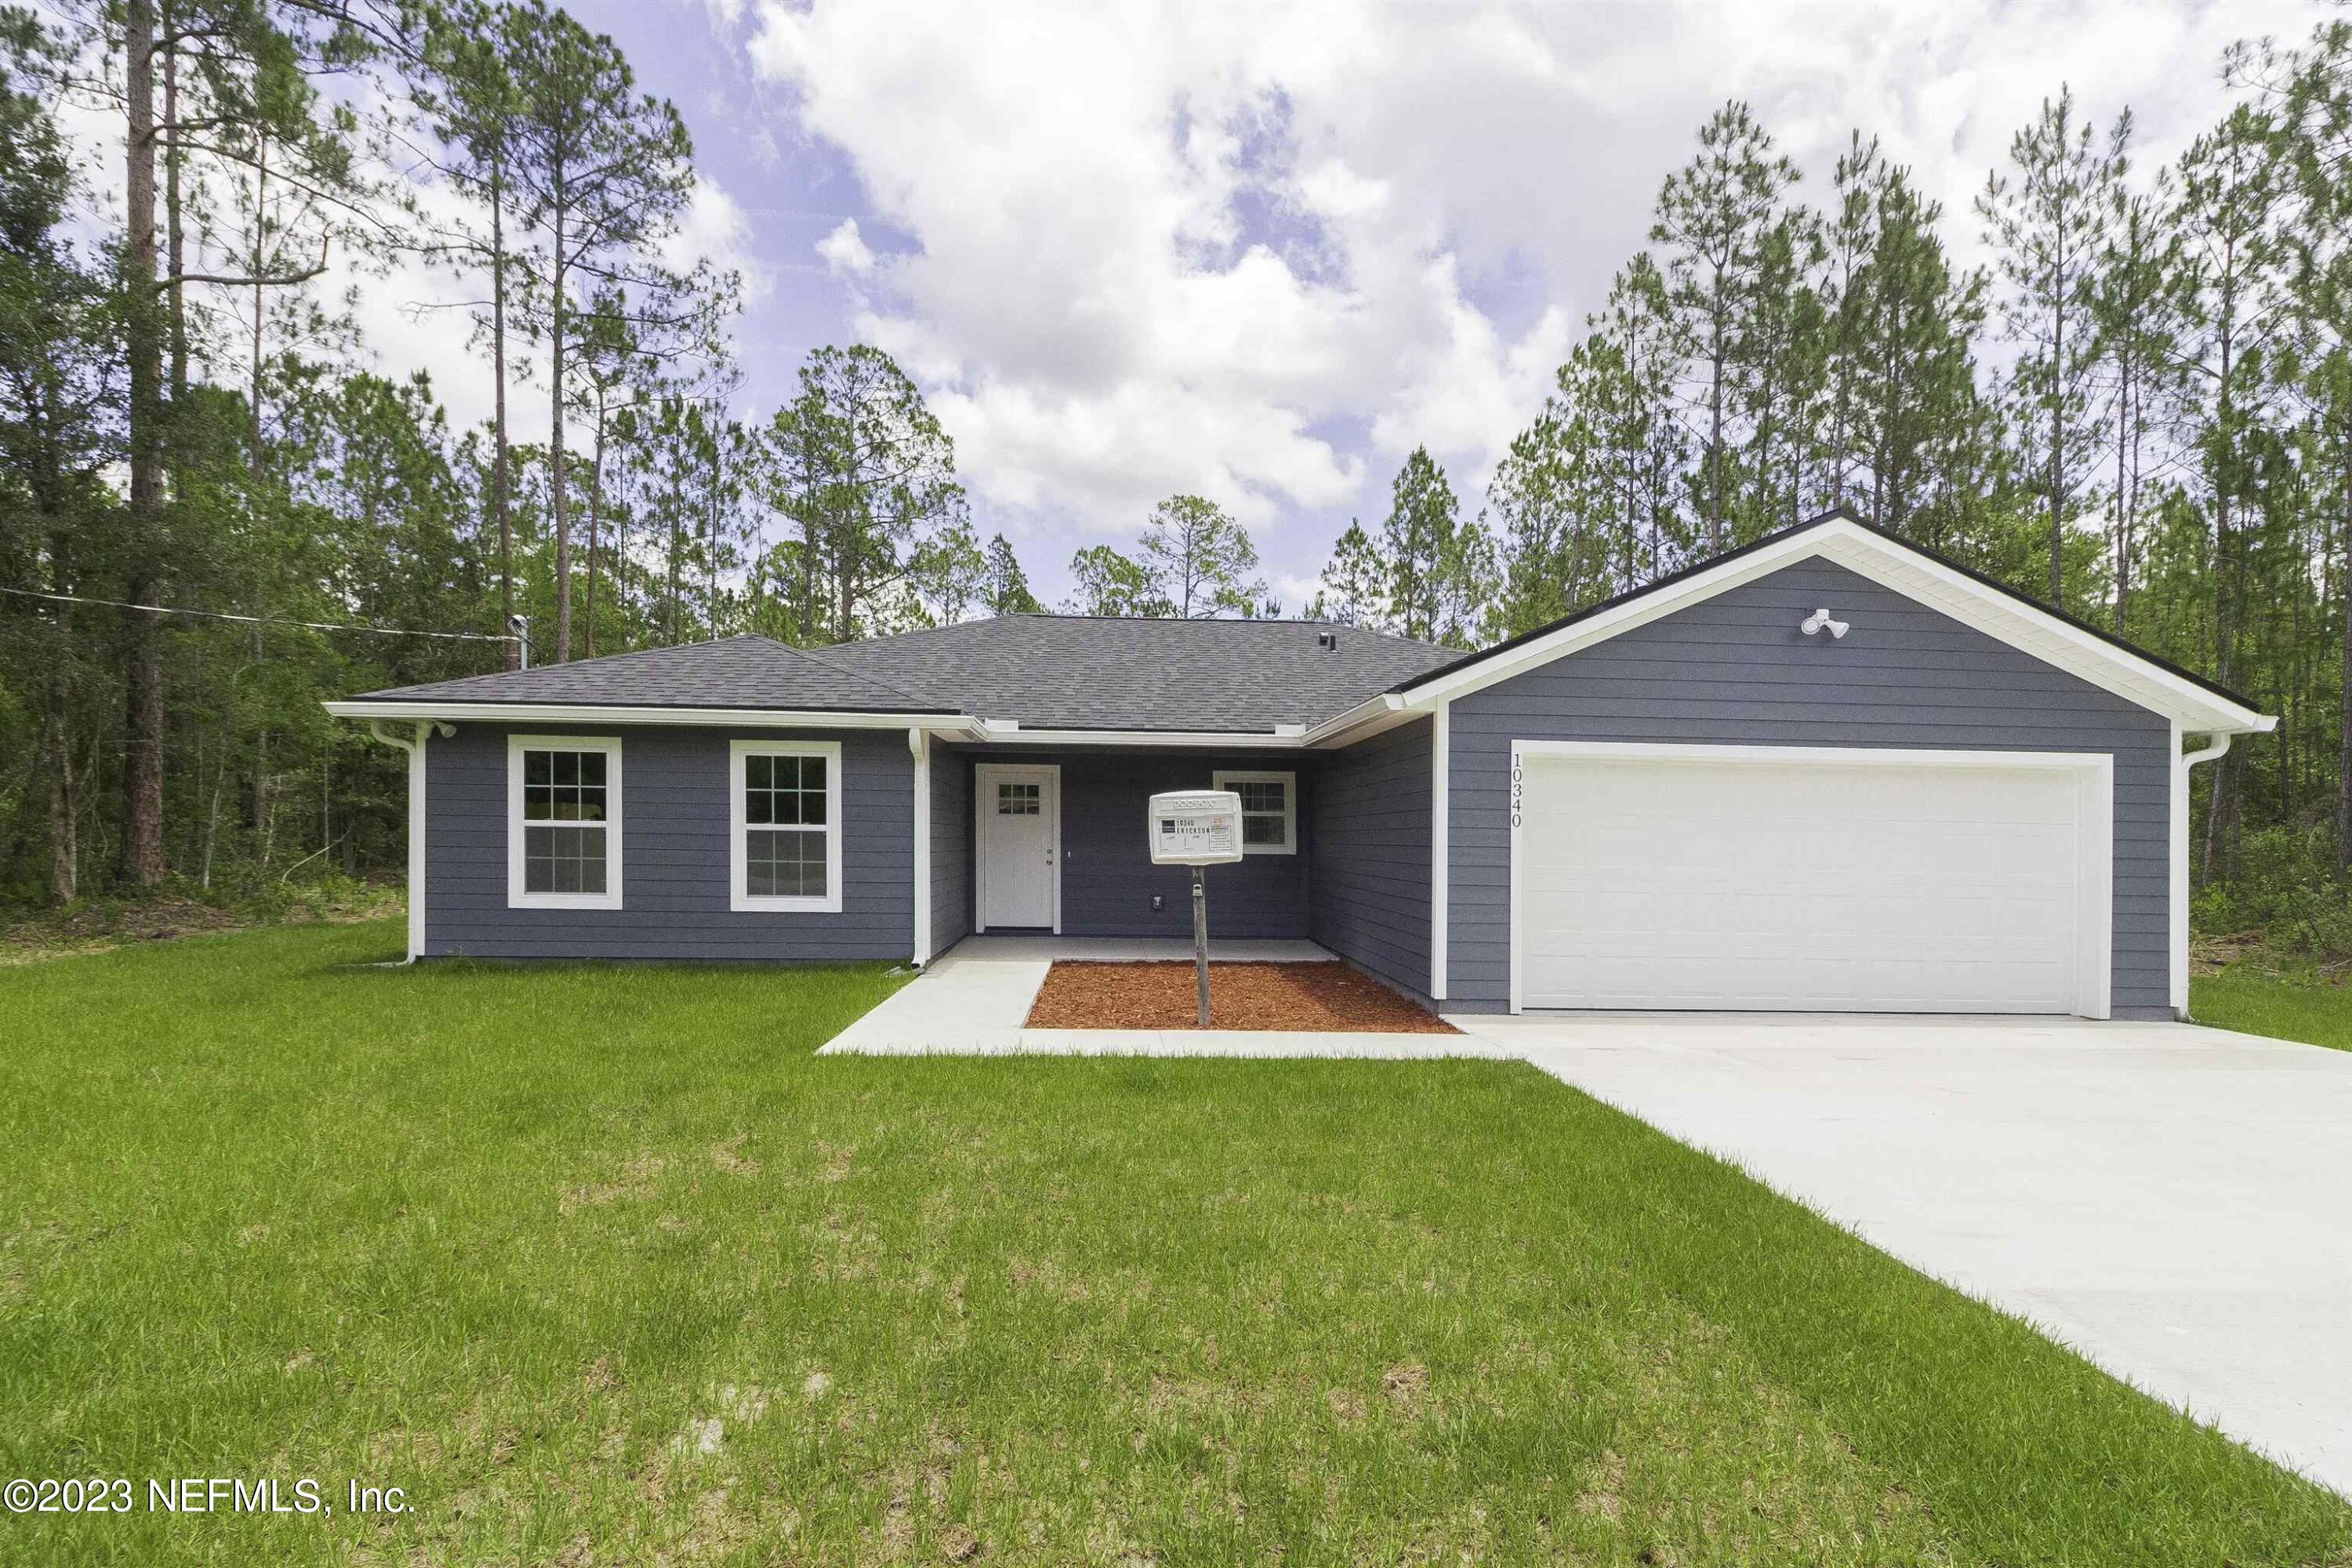 Hastings, FL home for sale located at 10015 STYCKET Avenue, Hastings, FL 32145